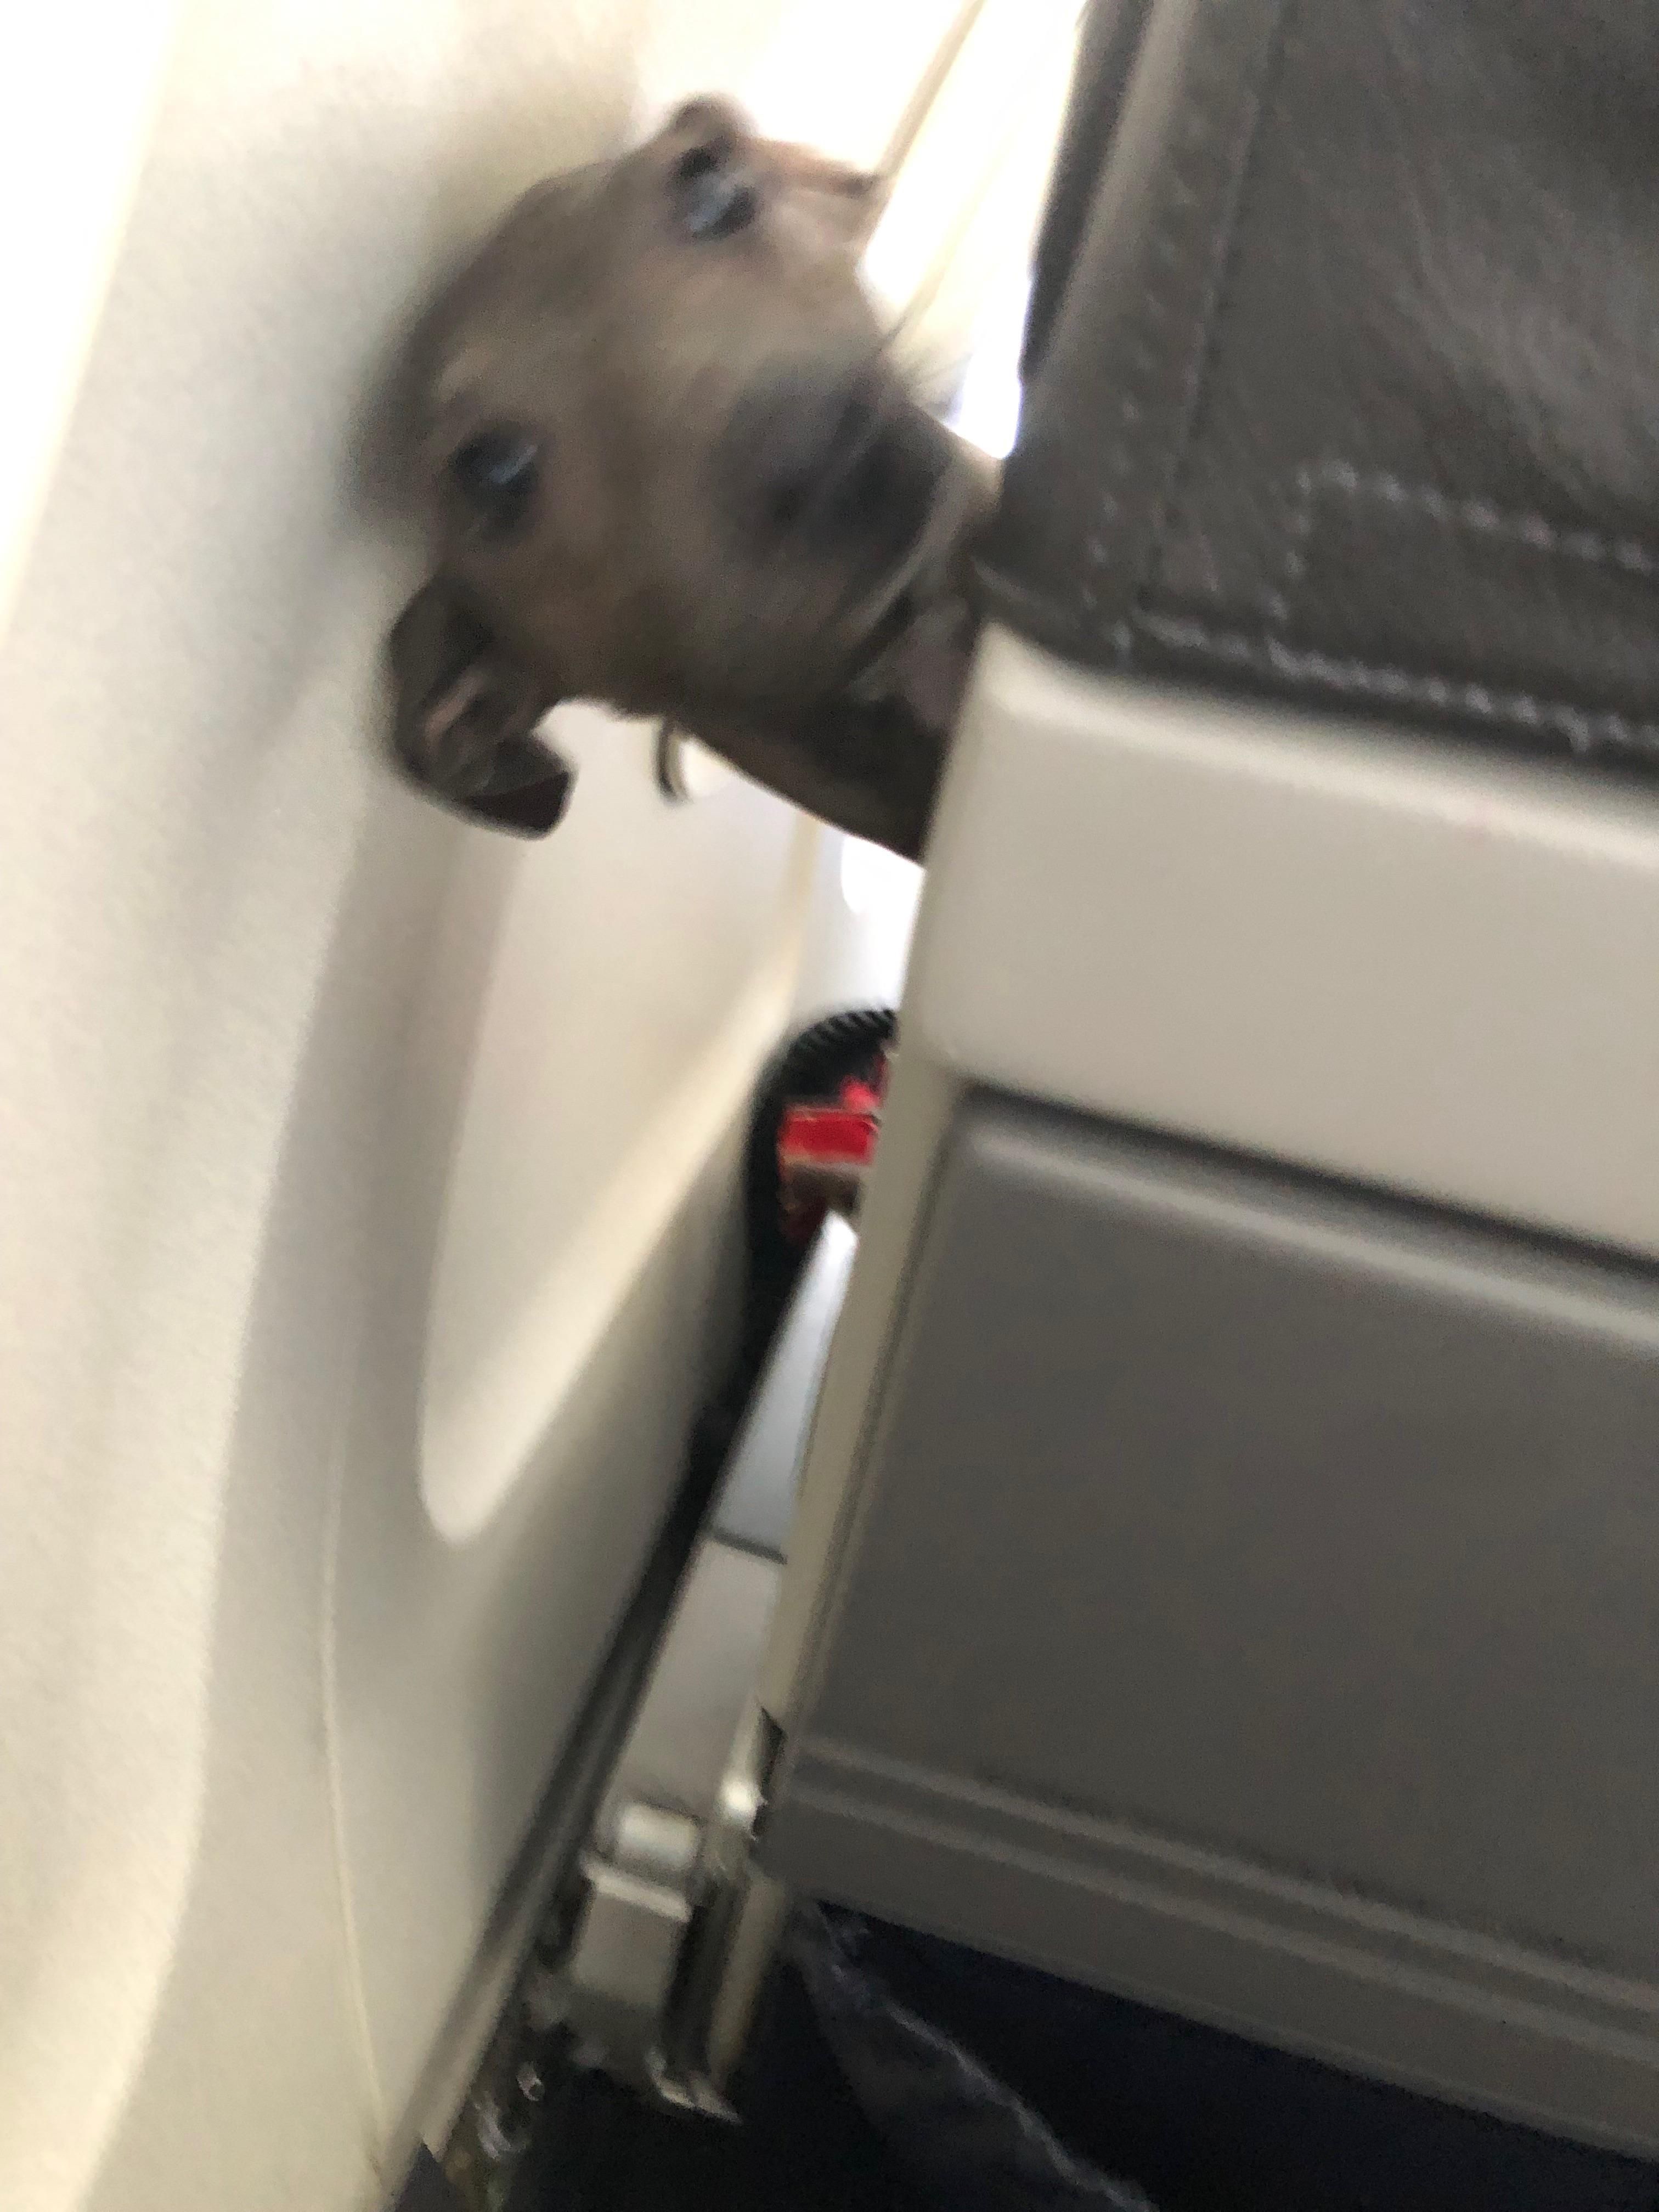 My girlfriend’s sister sat behind a good boy on the plane today.